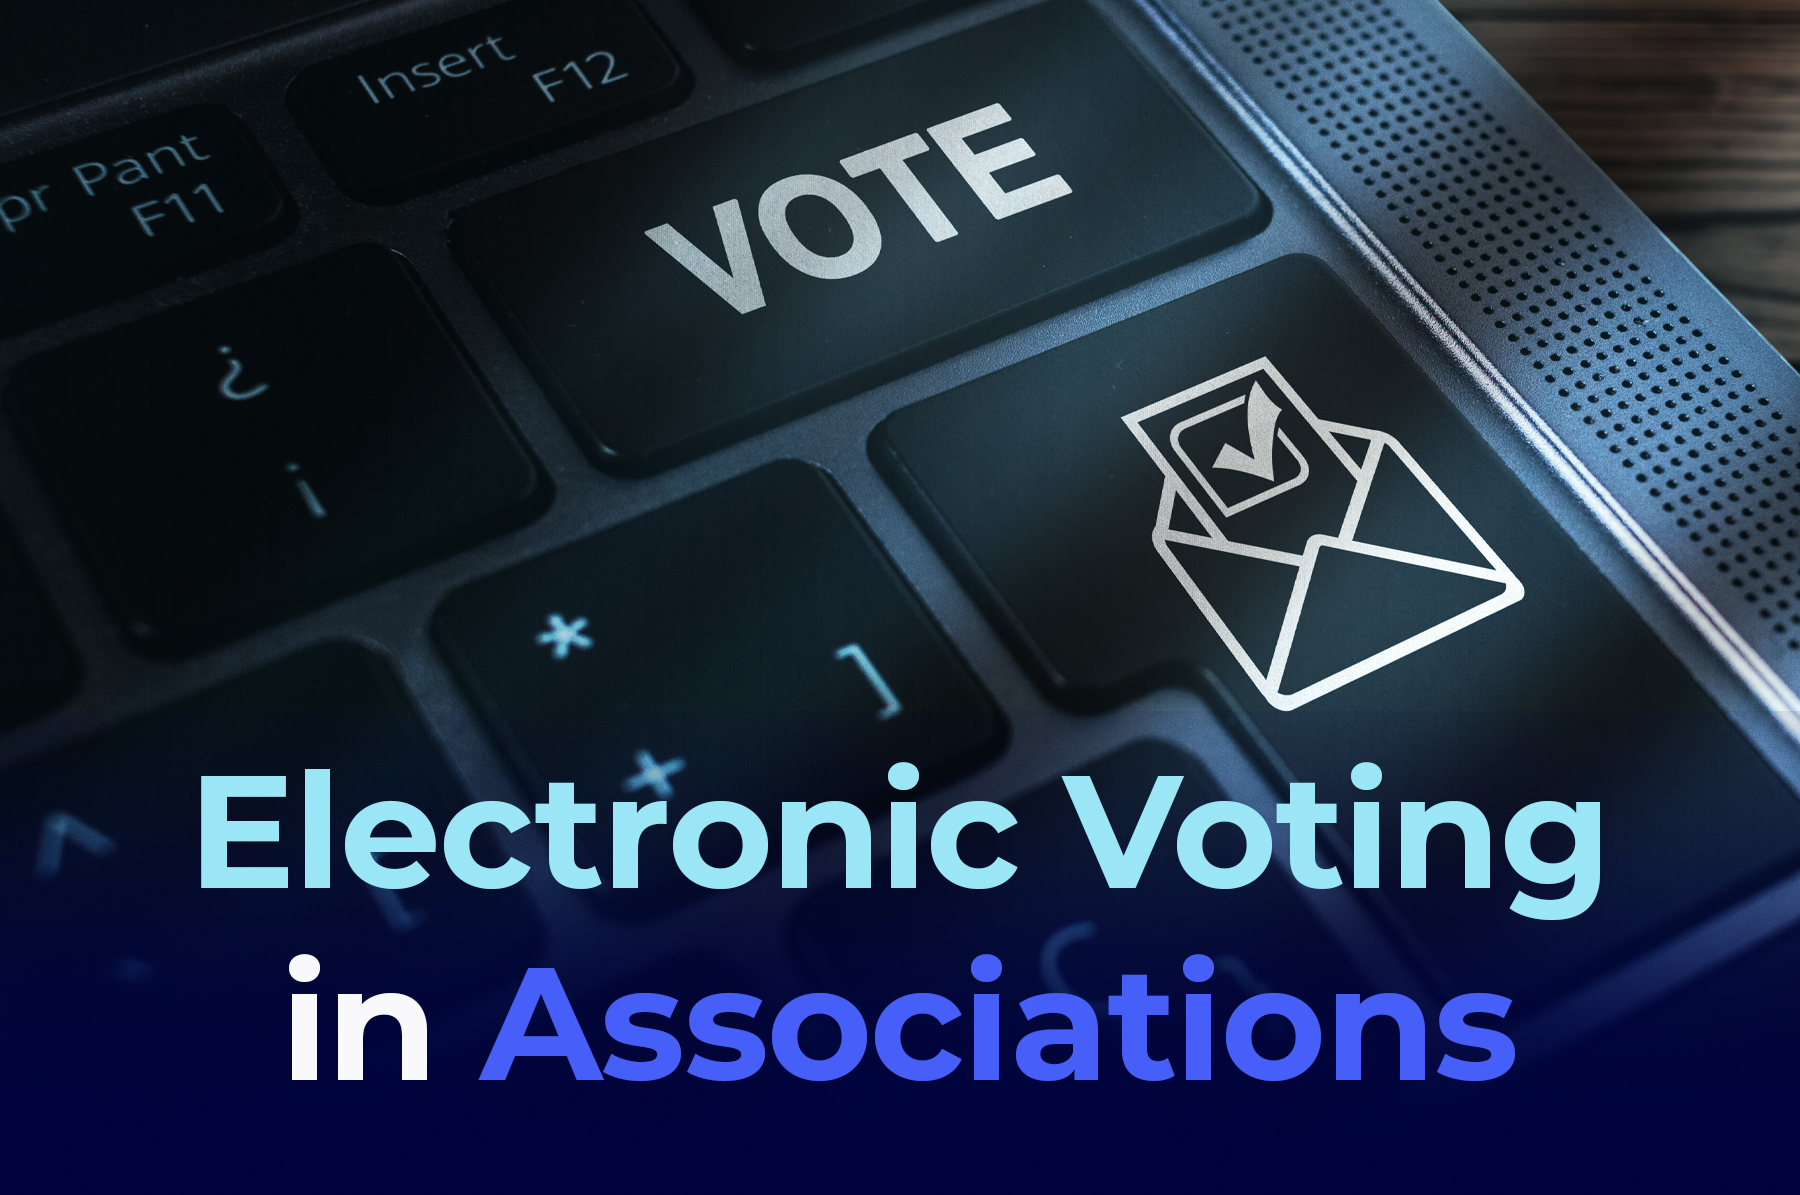 A picture of computer with the word "VOTE" instead of return, the drawing of an envelop with a check mark and the phrase Electronic Voting in Associations